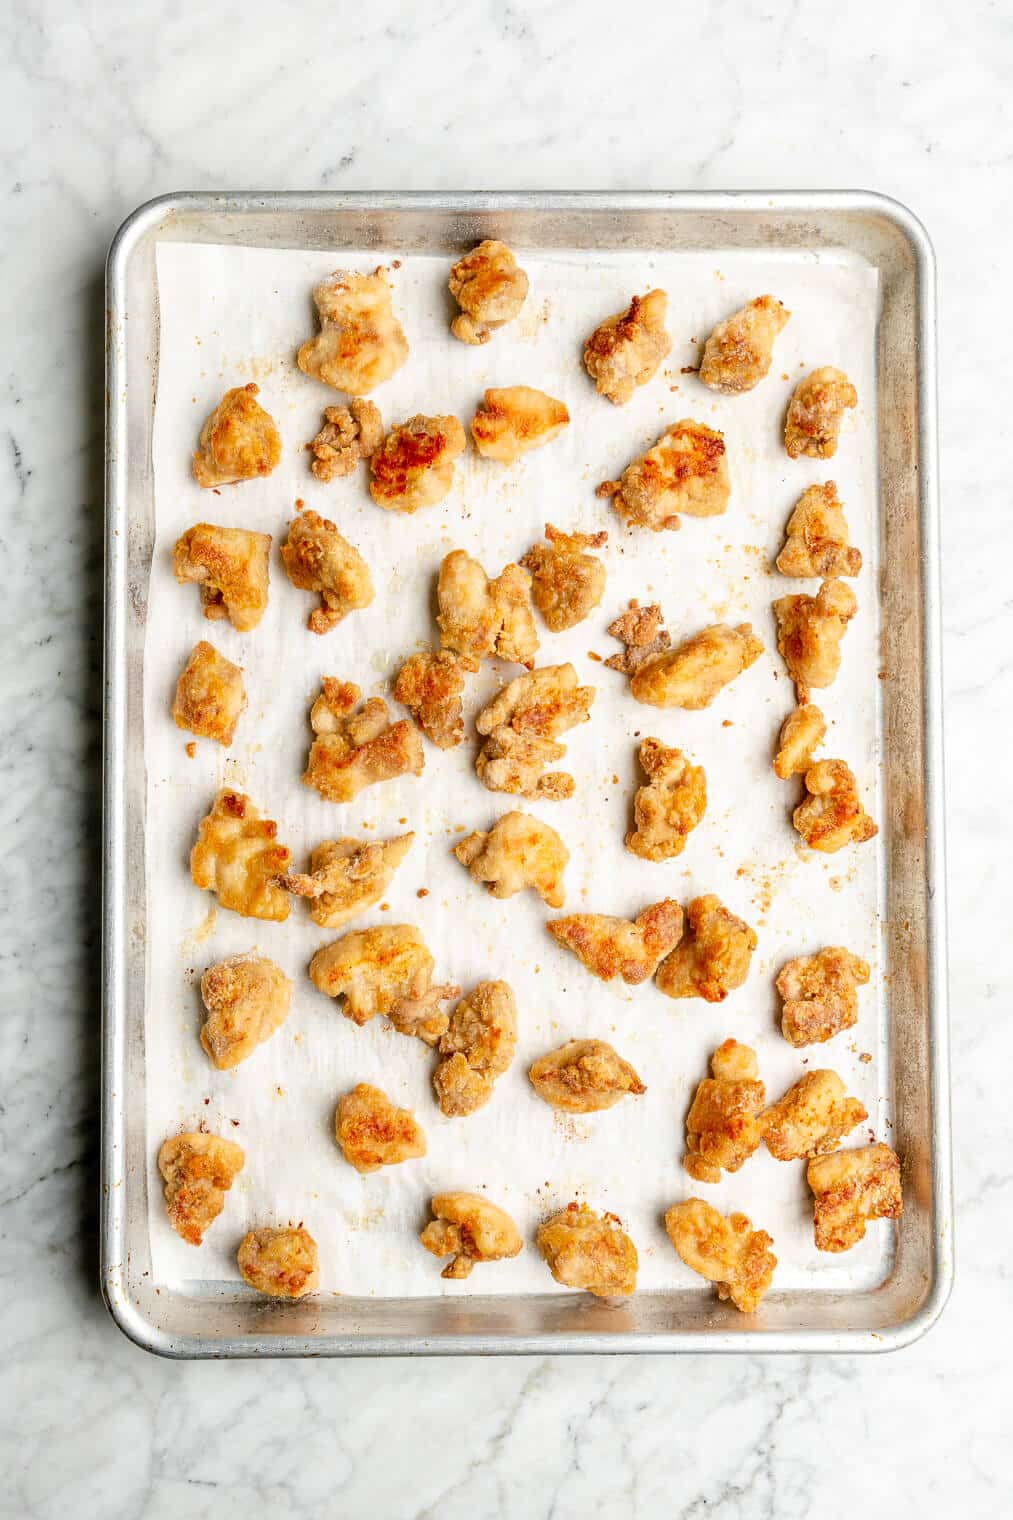 Small chunks of crispy chicken thighs coated with an arrowroot starch and white rice flour coating spread out on a parchment paper lined baking sheet.